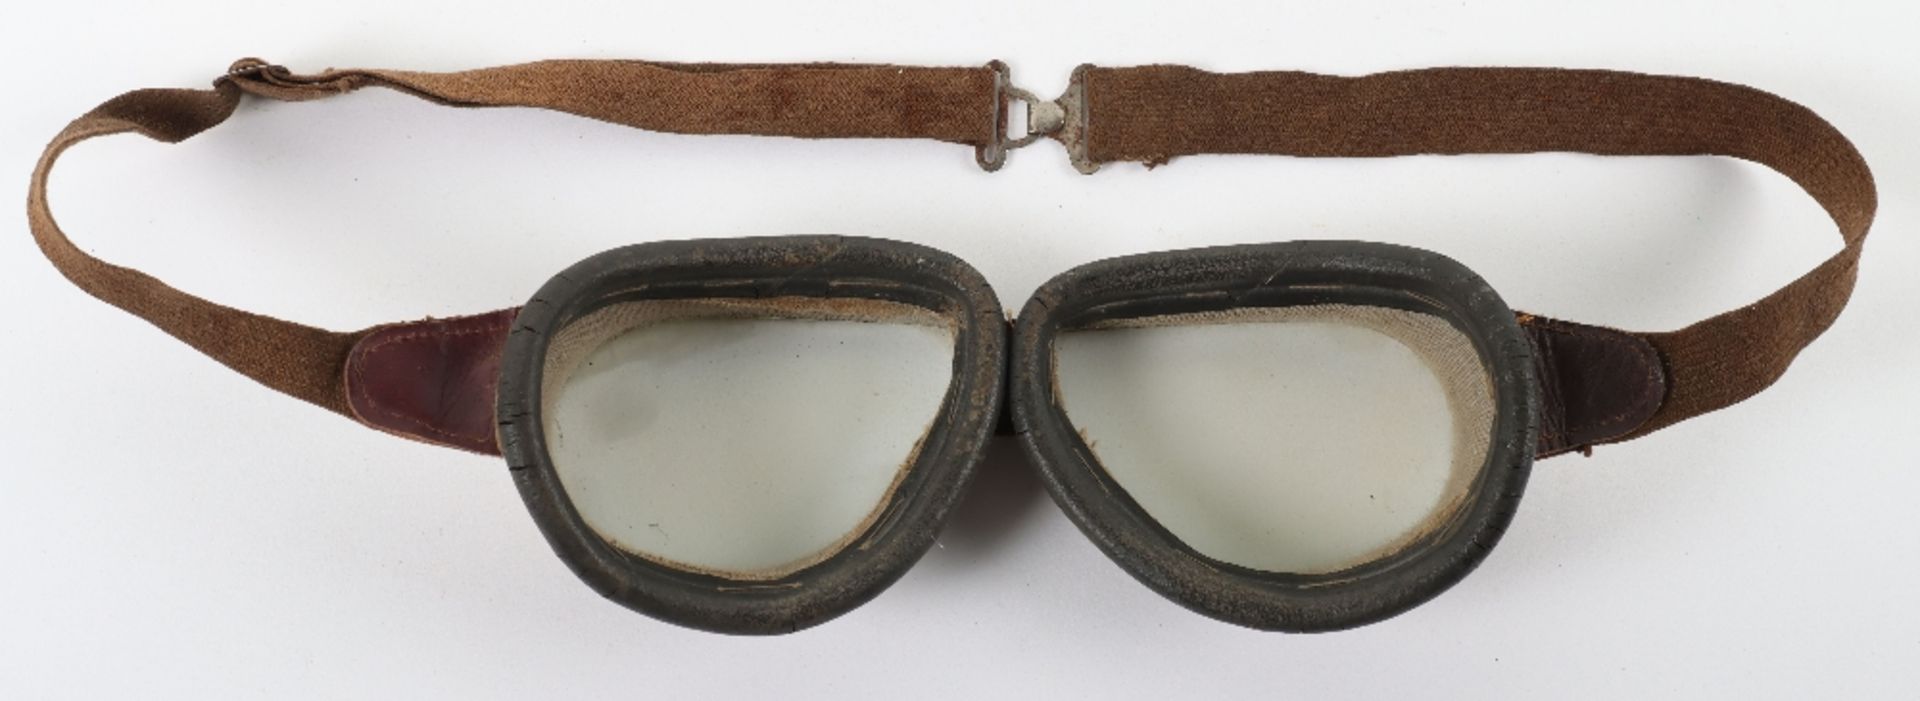 Pair of Early Aviators Goggles - Image 5 of 5